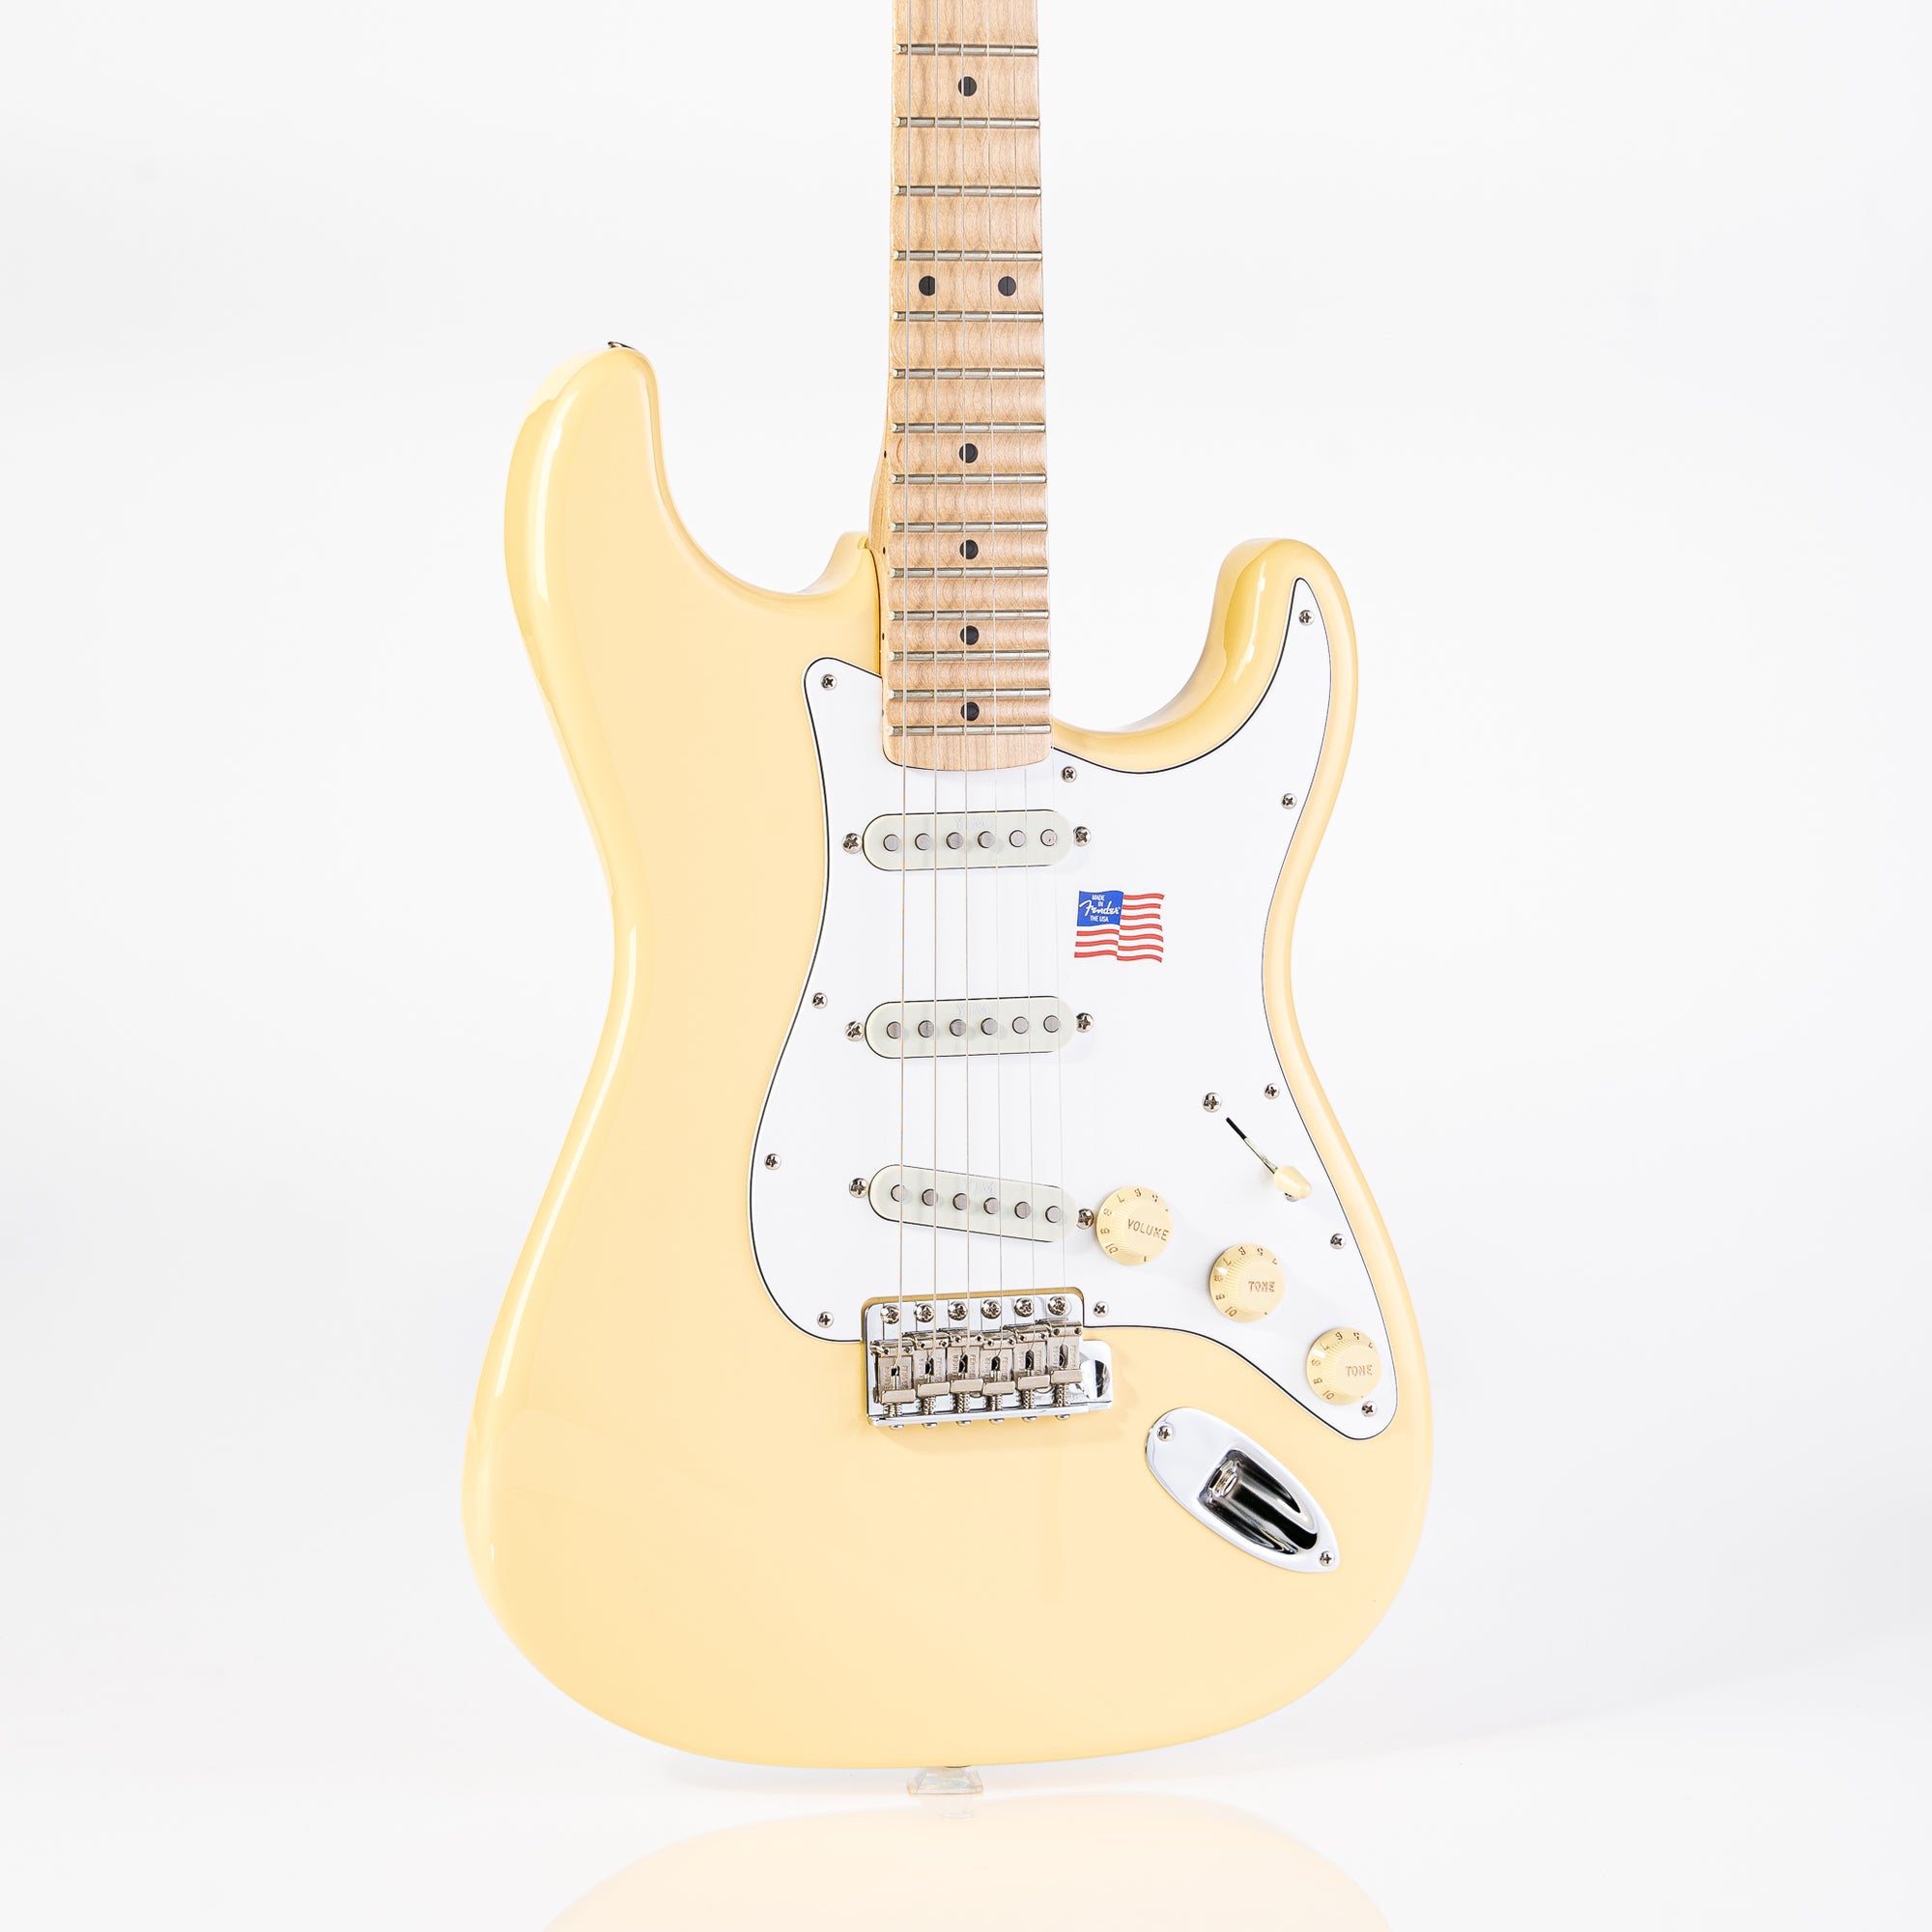 USED Fender Yngwie Malmsteen Signature Stratocaster Scalloped Maple Neck Electric Guitar- Vintage White